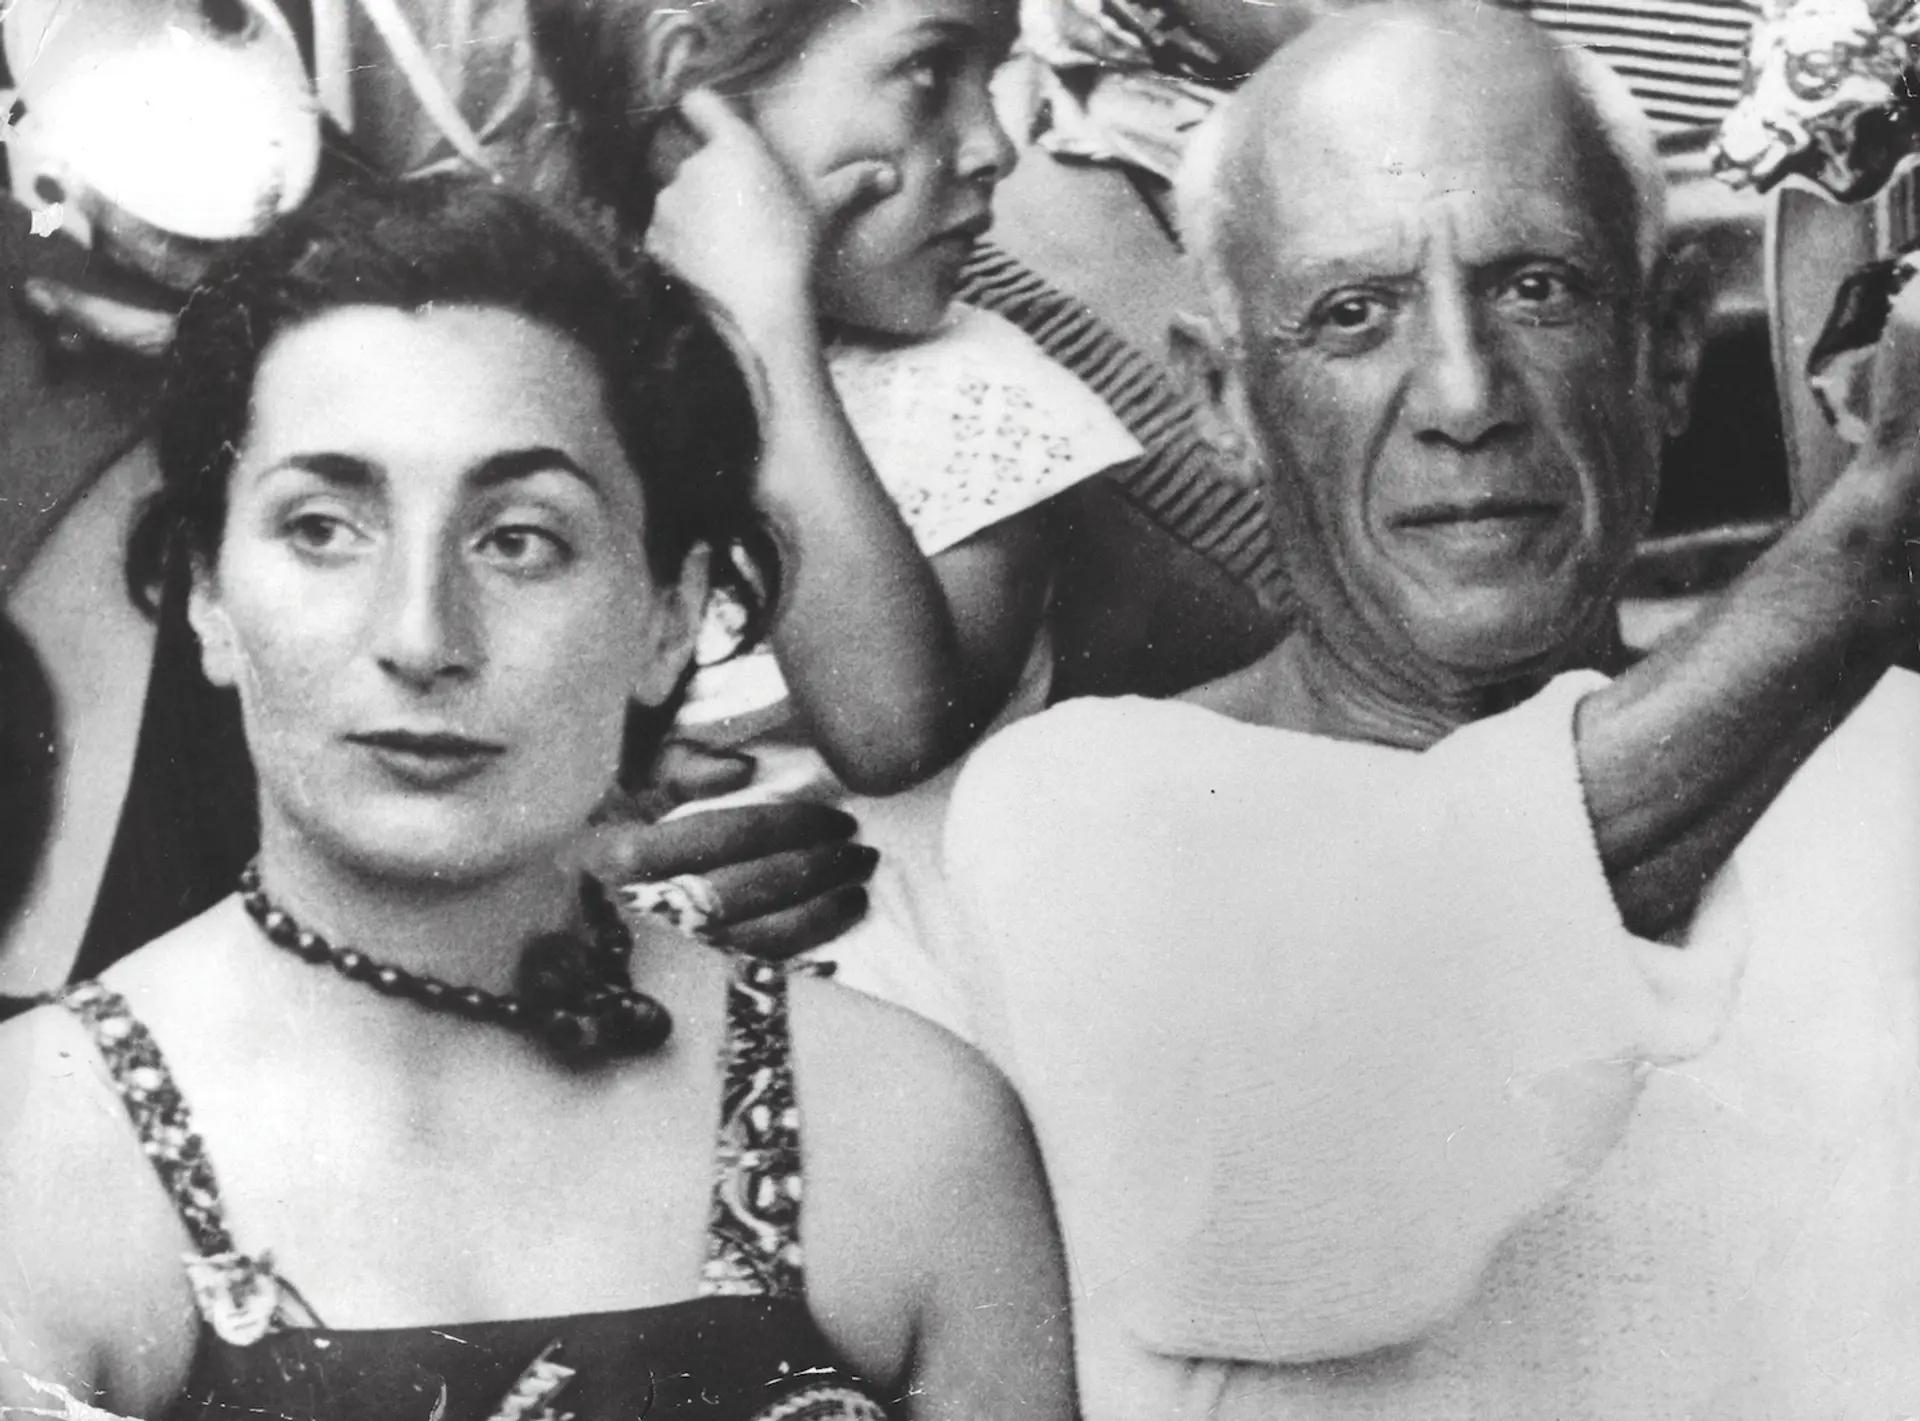 Picasso’s Study for Lysistrata (1933) is among the works stolen from Catherine Hutin-Blay, whose mother Jacqueline (left) was married to the artist Keystone Press/Alamy Stock Photo